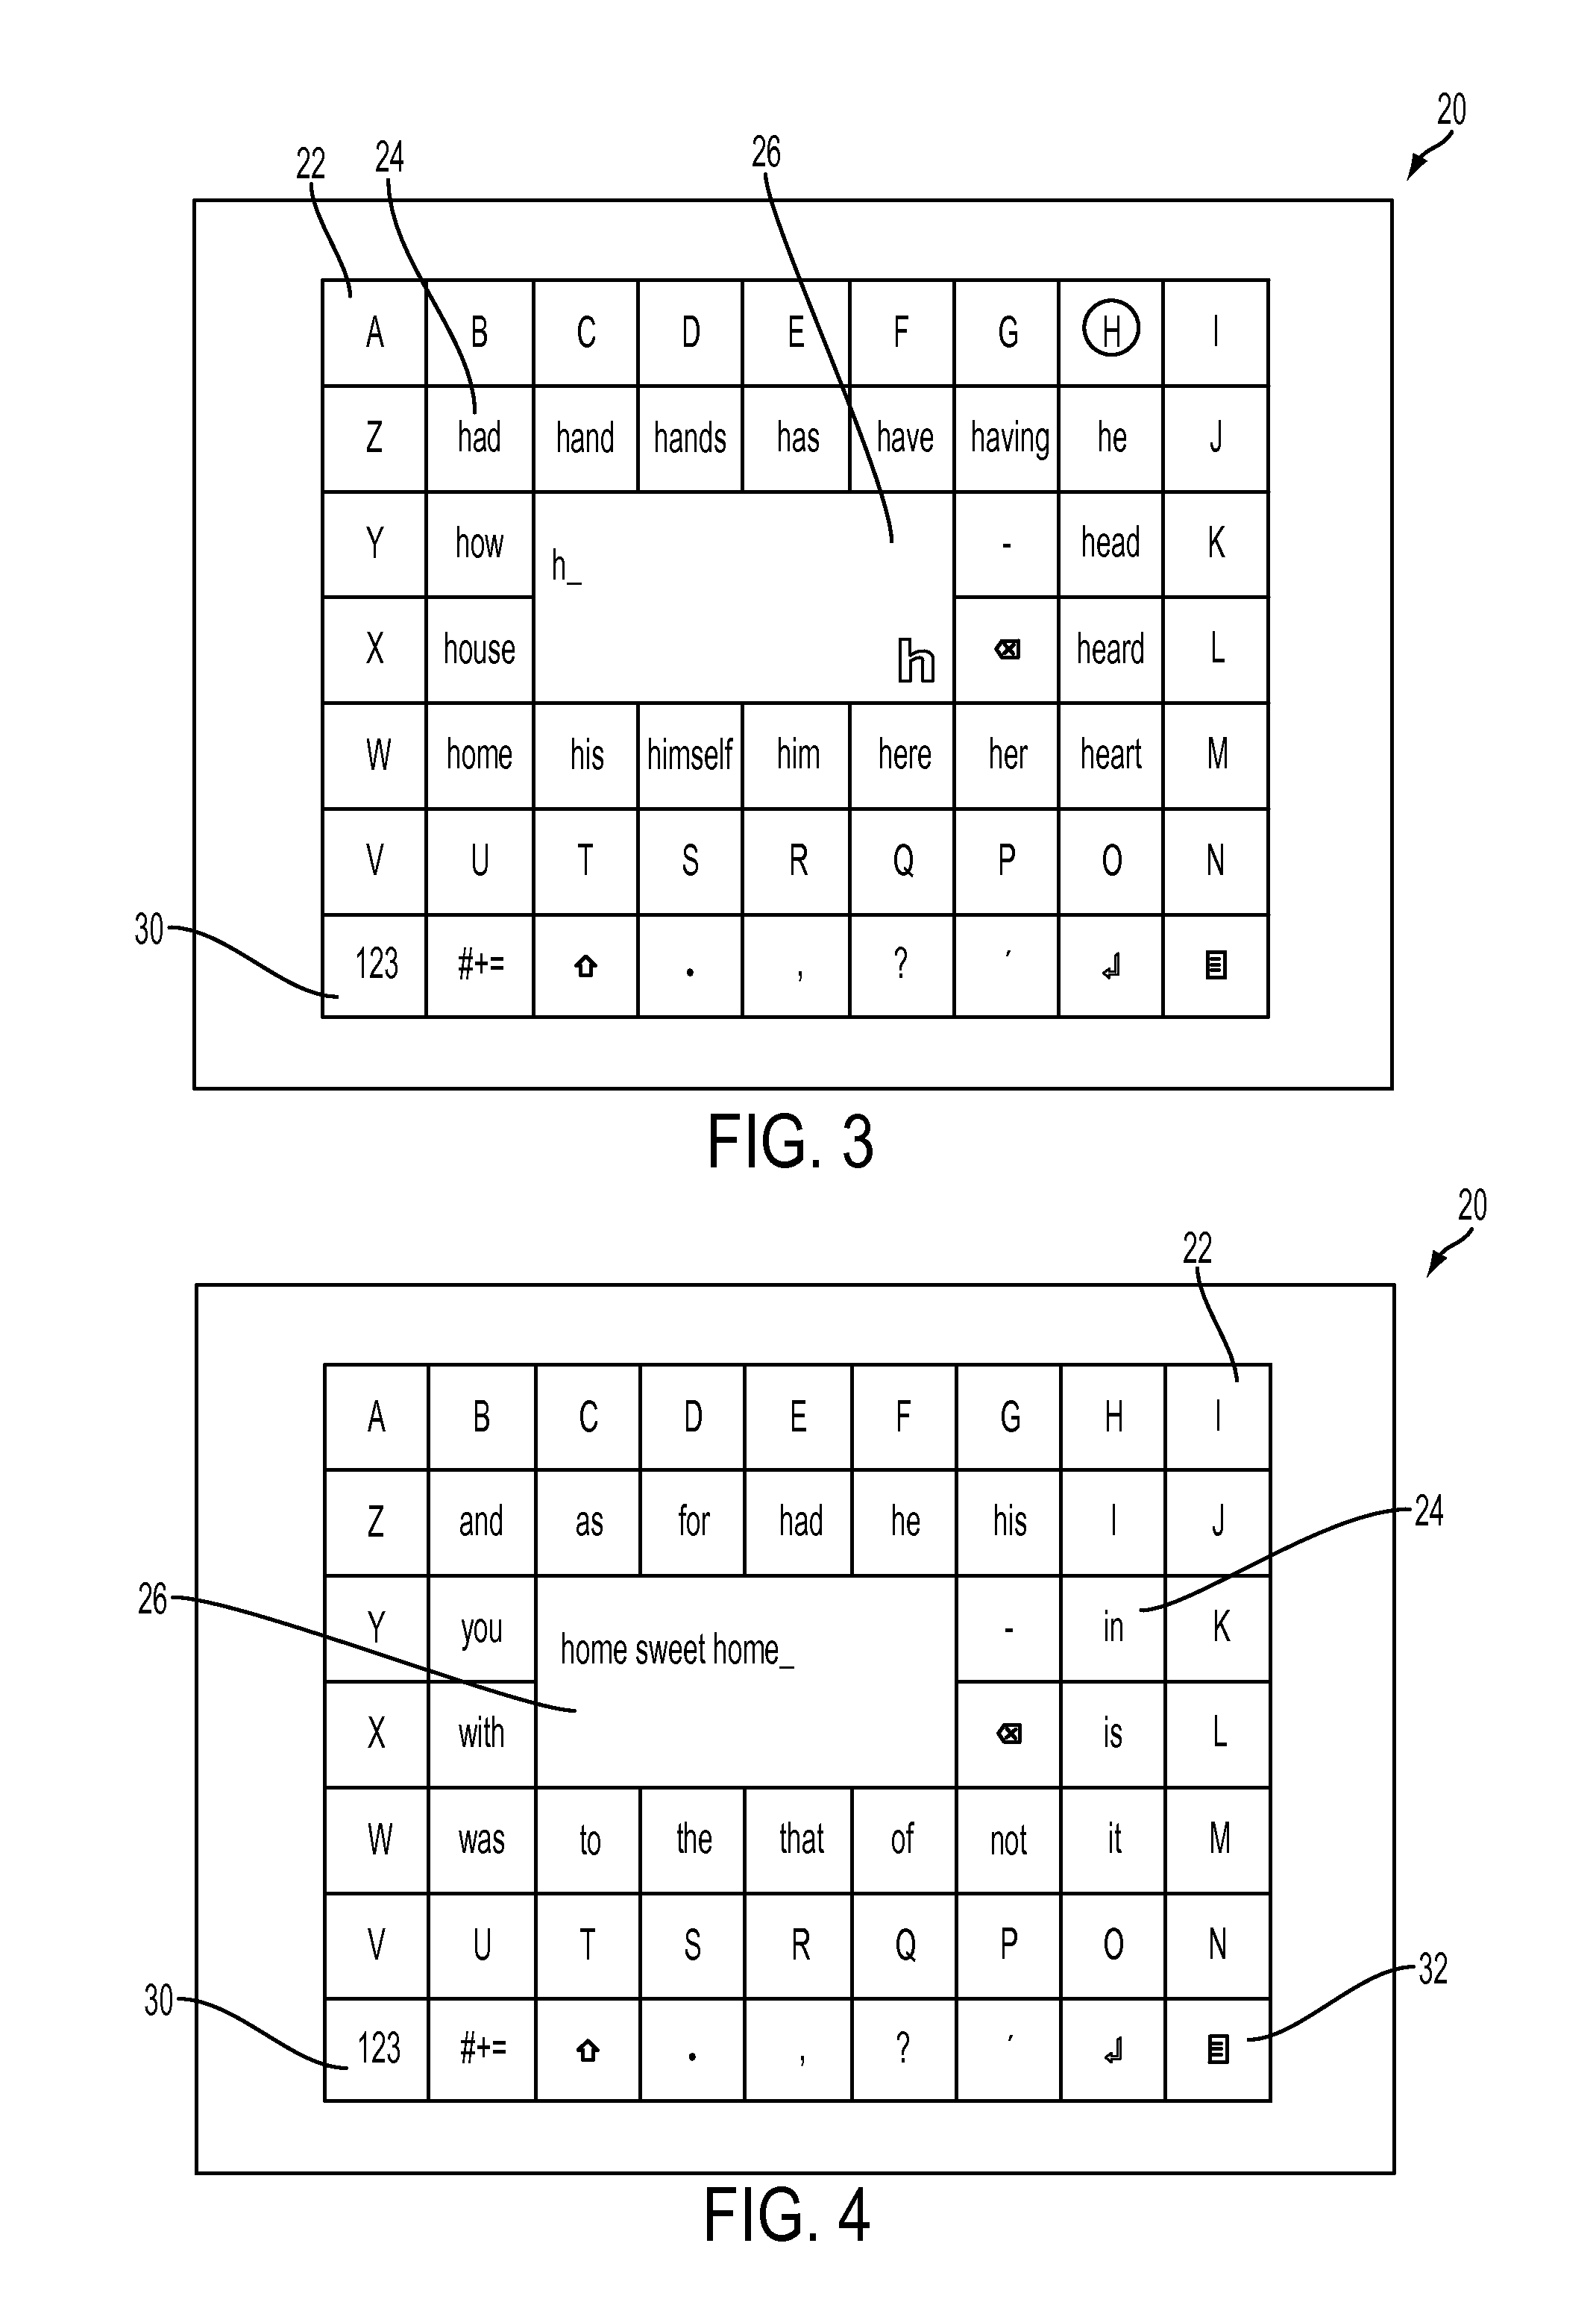 Eye typing system using a three-layer user interface